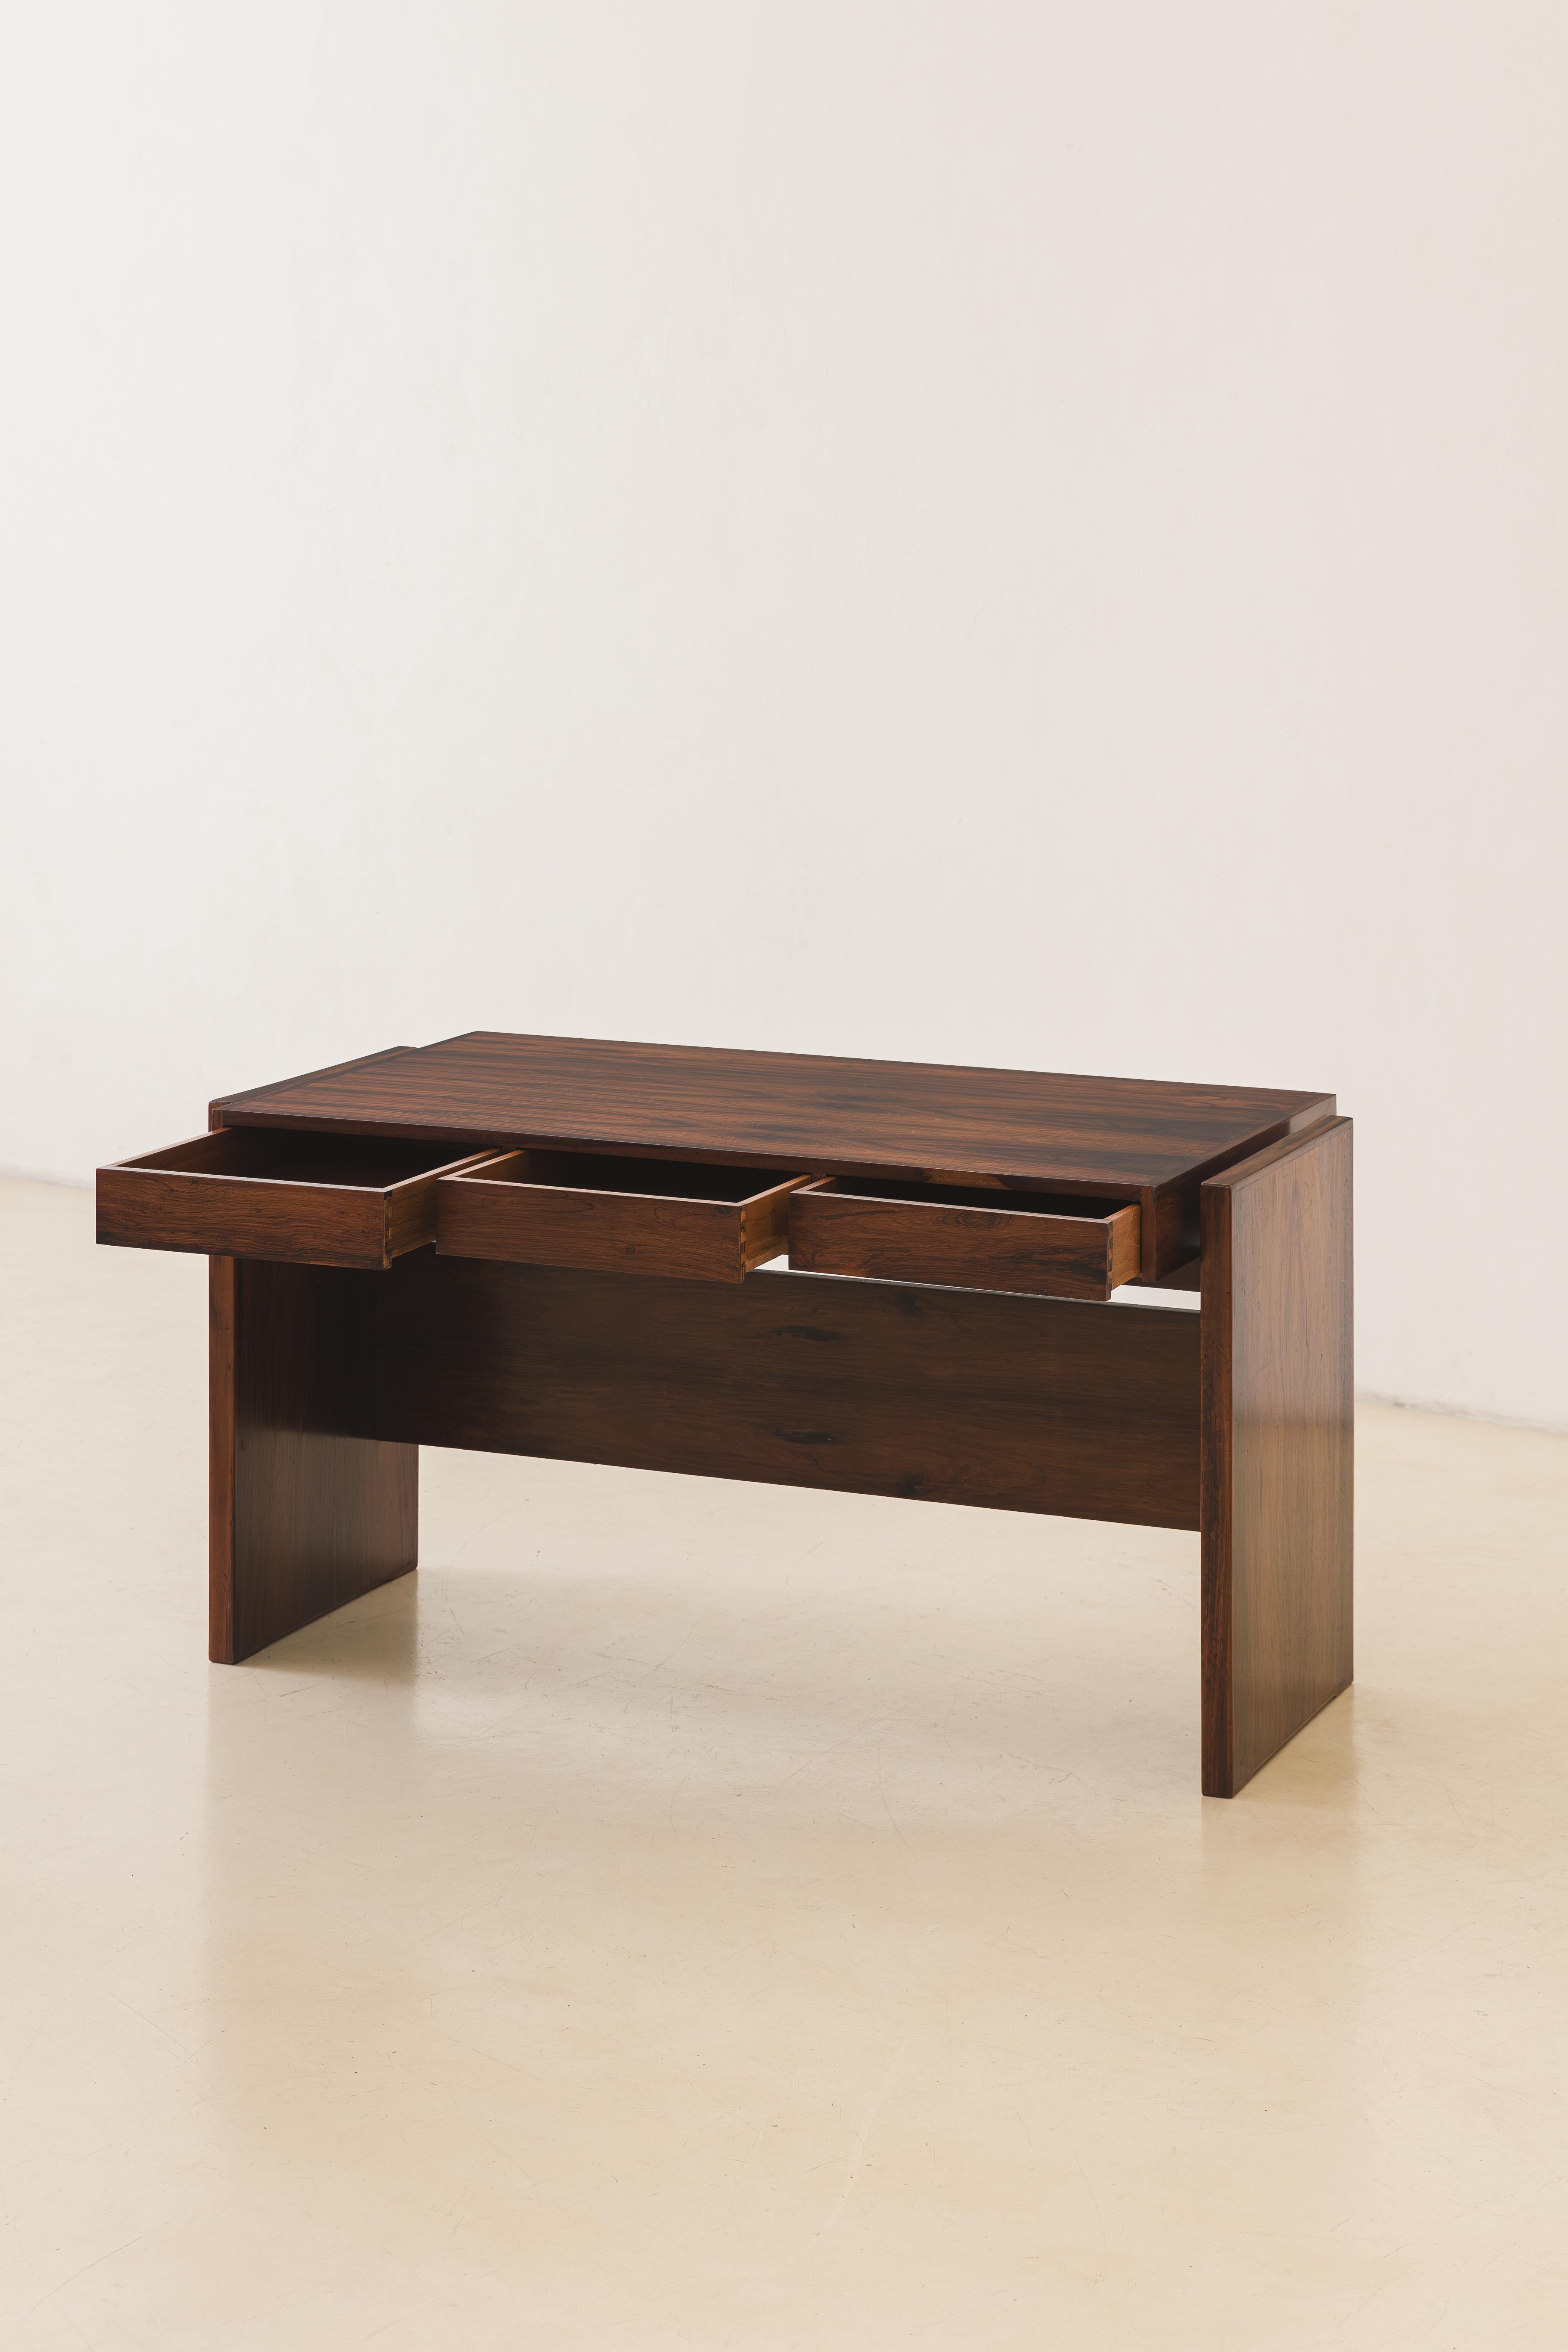 This exquisitely crafted Rosewood Desk designed by Joaquim Tenreiro (1906-1992) belonged to BLOCH EDITORES S.A. BUILDING, a Brazilian publisher founded in 1952 and closed in 2000, where Tenreiro furnished the interior.

The desk is composed of a